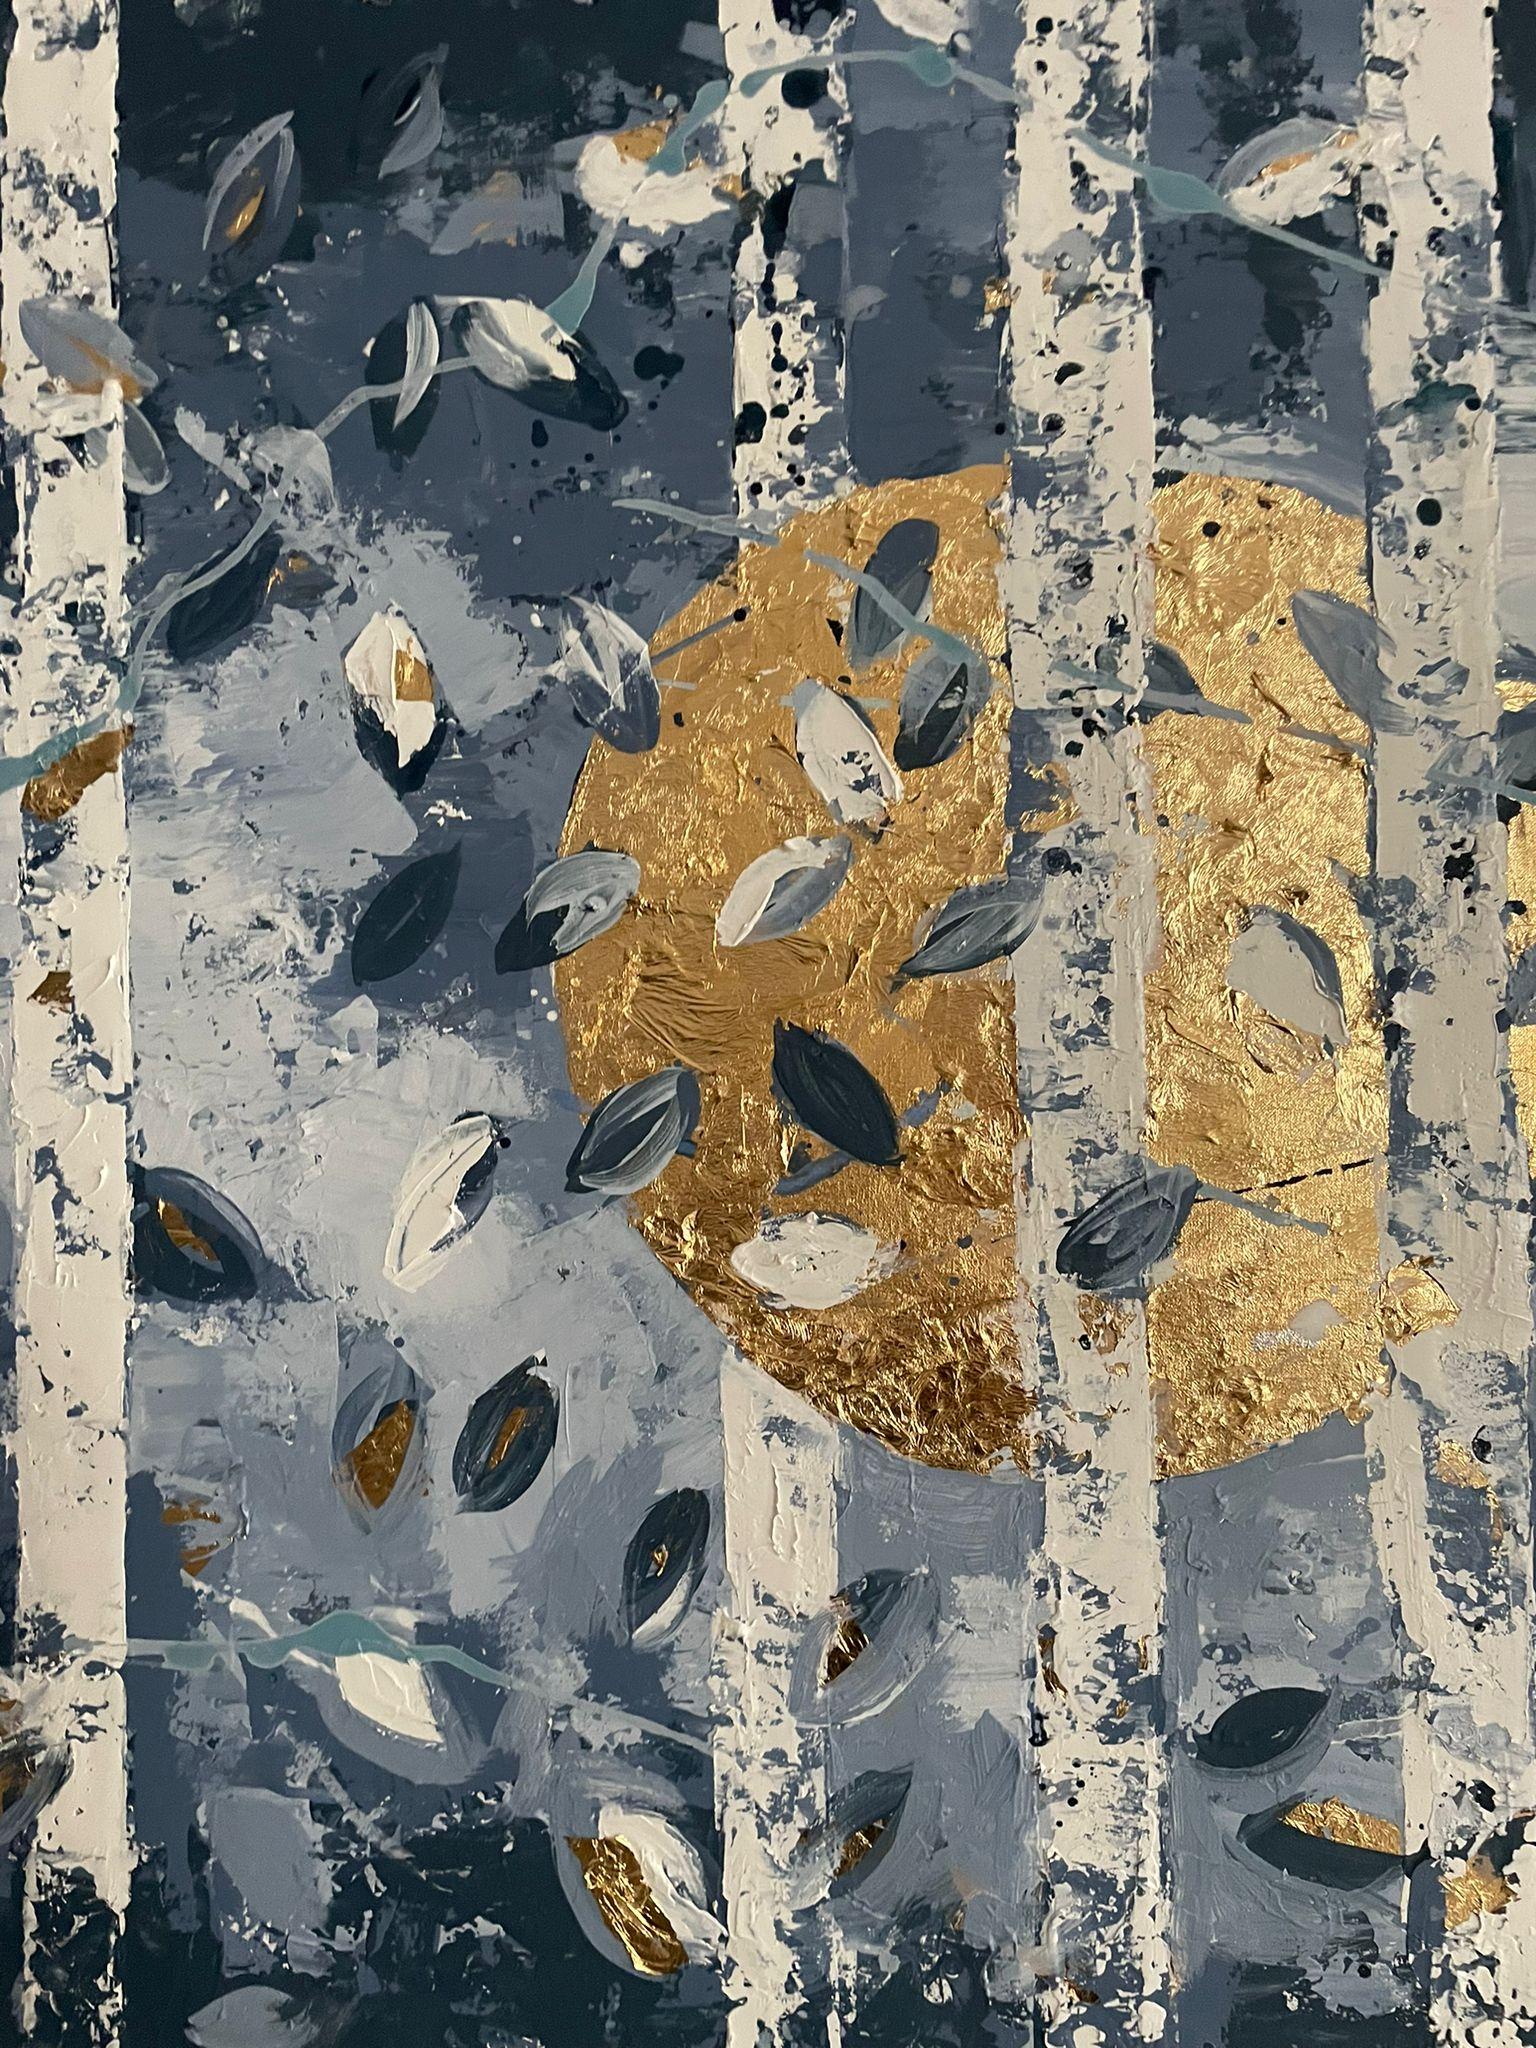 Moonlight through the Woods - 21st Cent., Oil, abstract, night, blue, gold leaf - Painting by Chelsea Davine